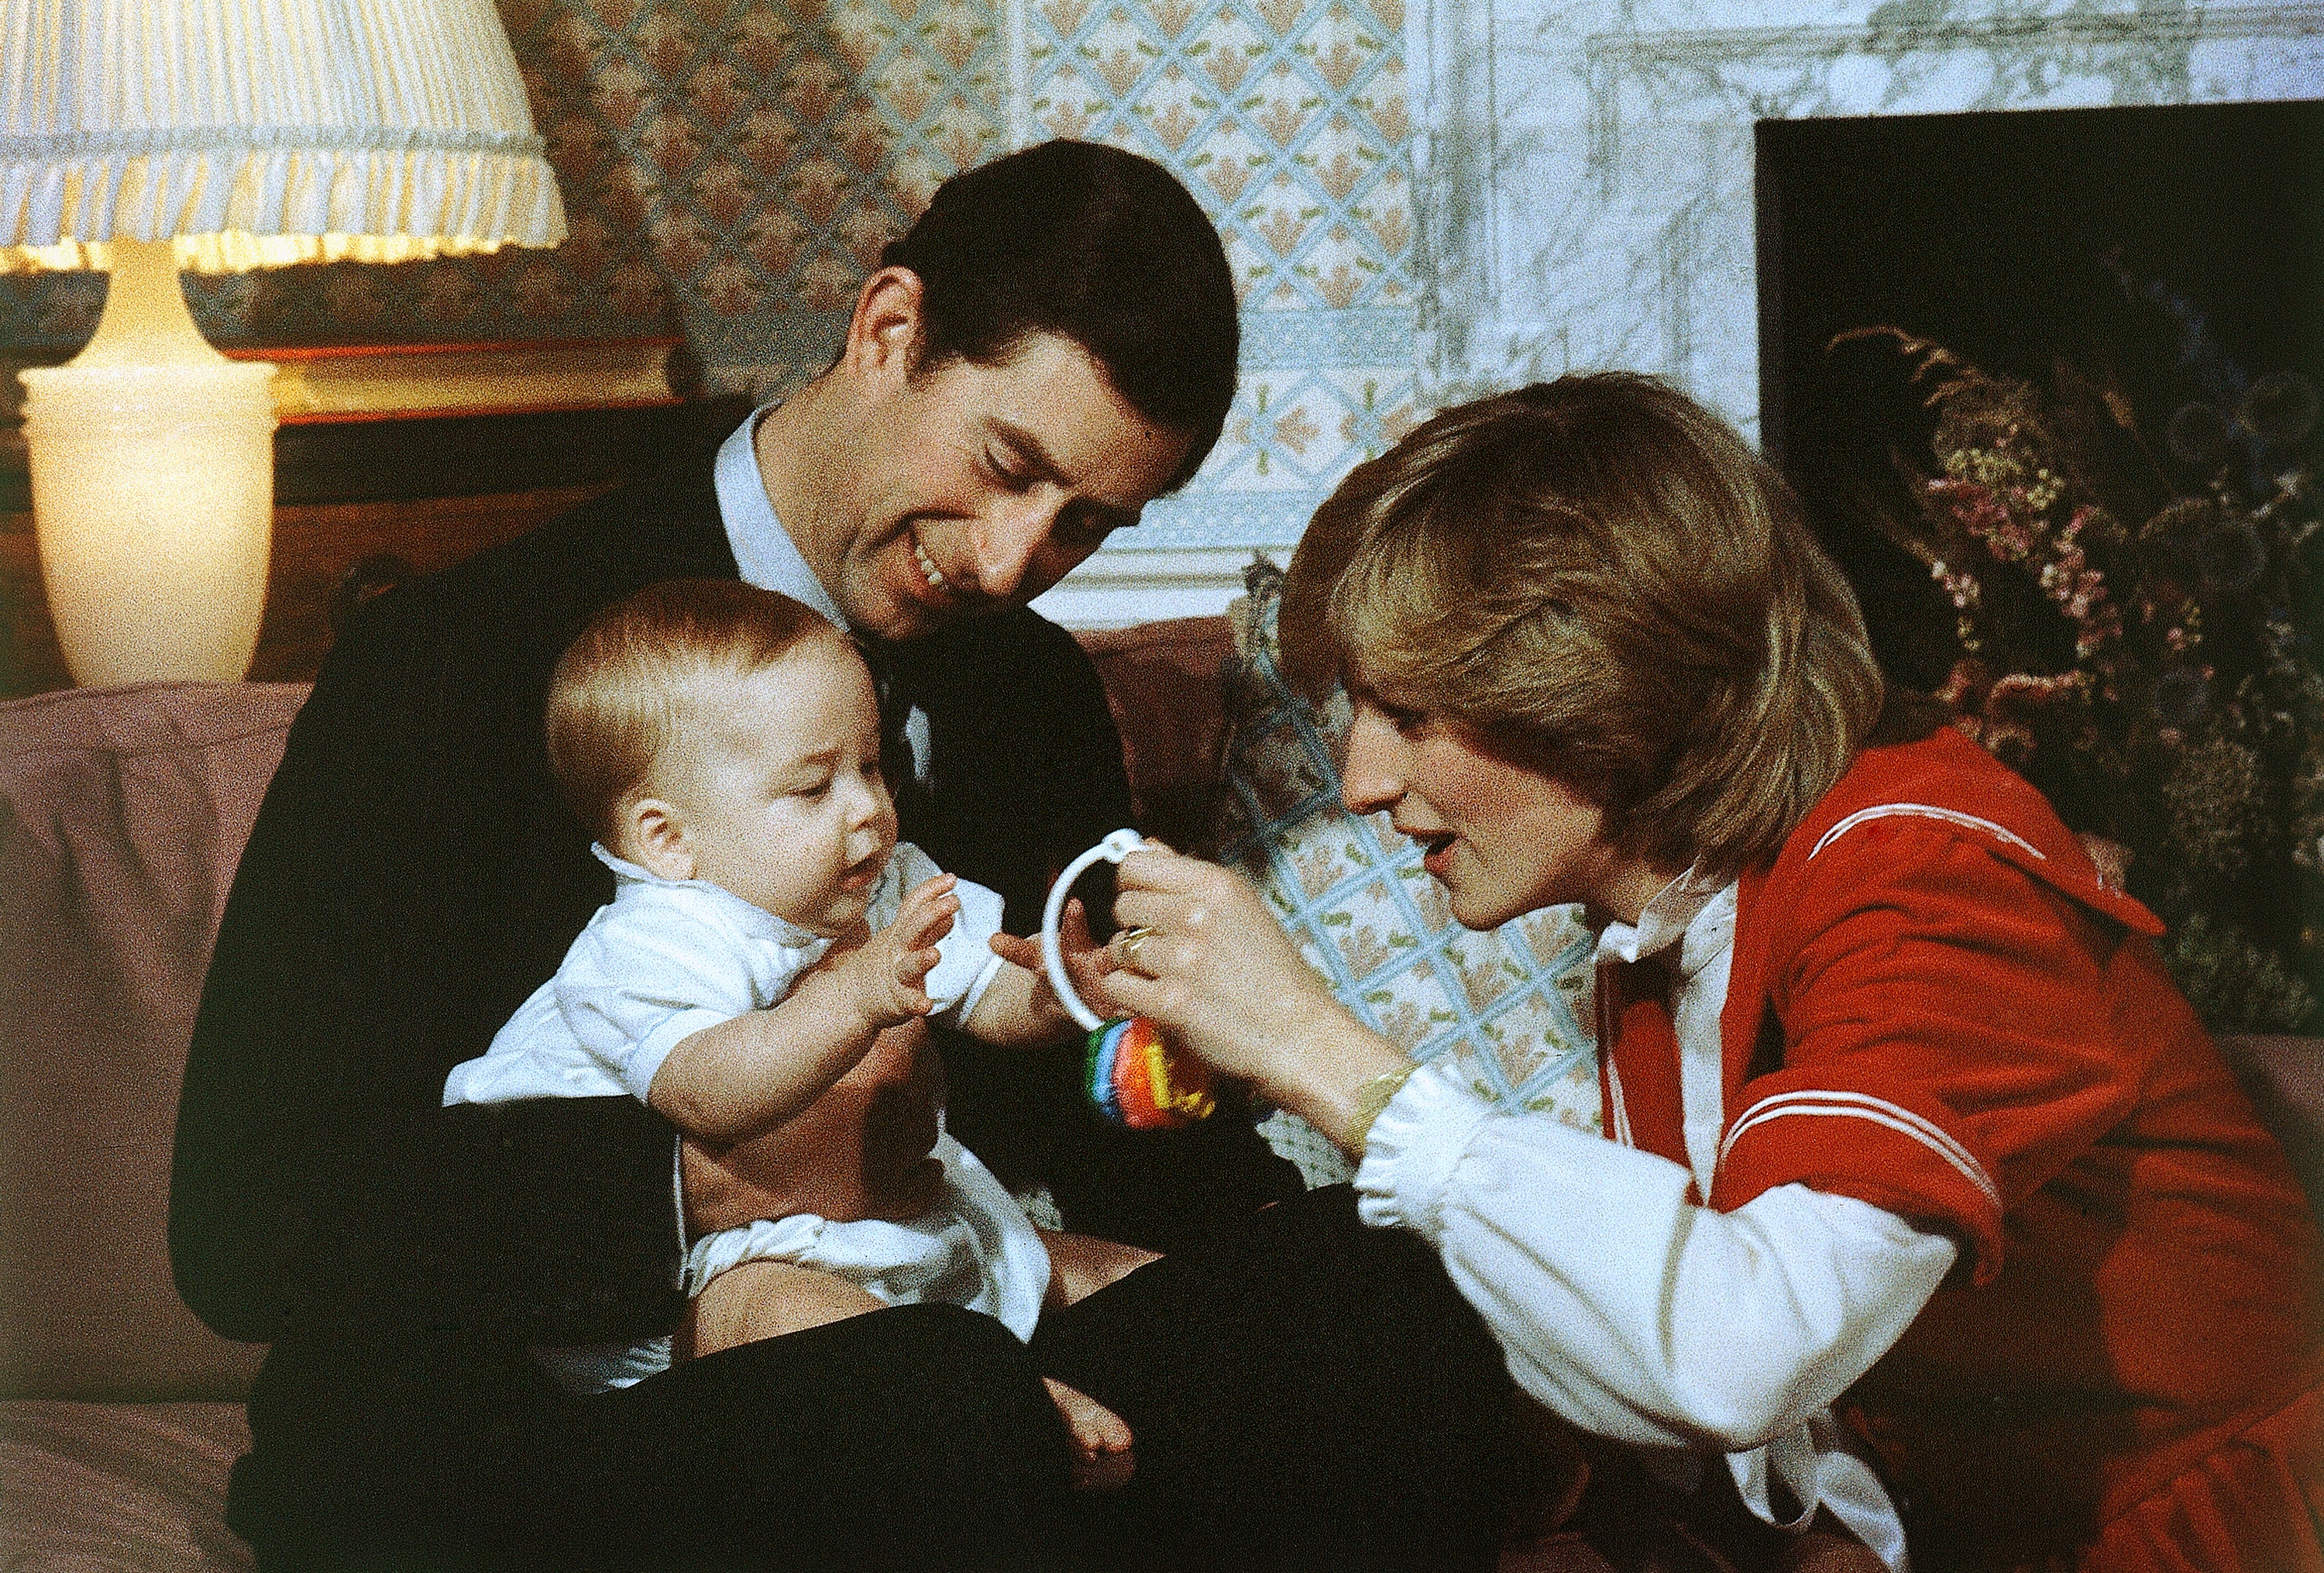 Prince William, now 42, is here pictured when he was just six months old.